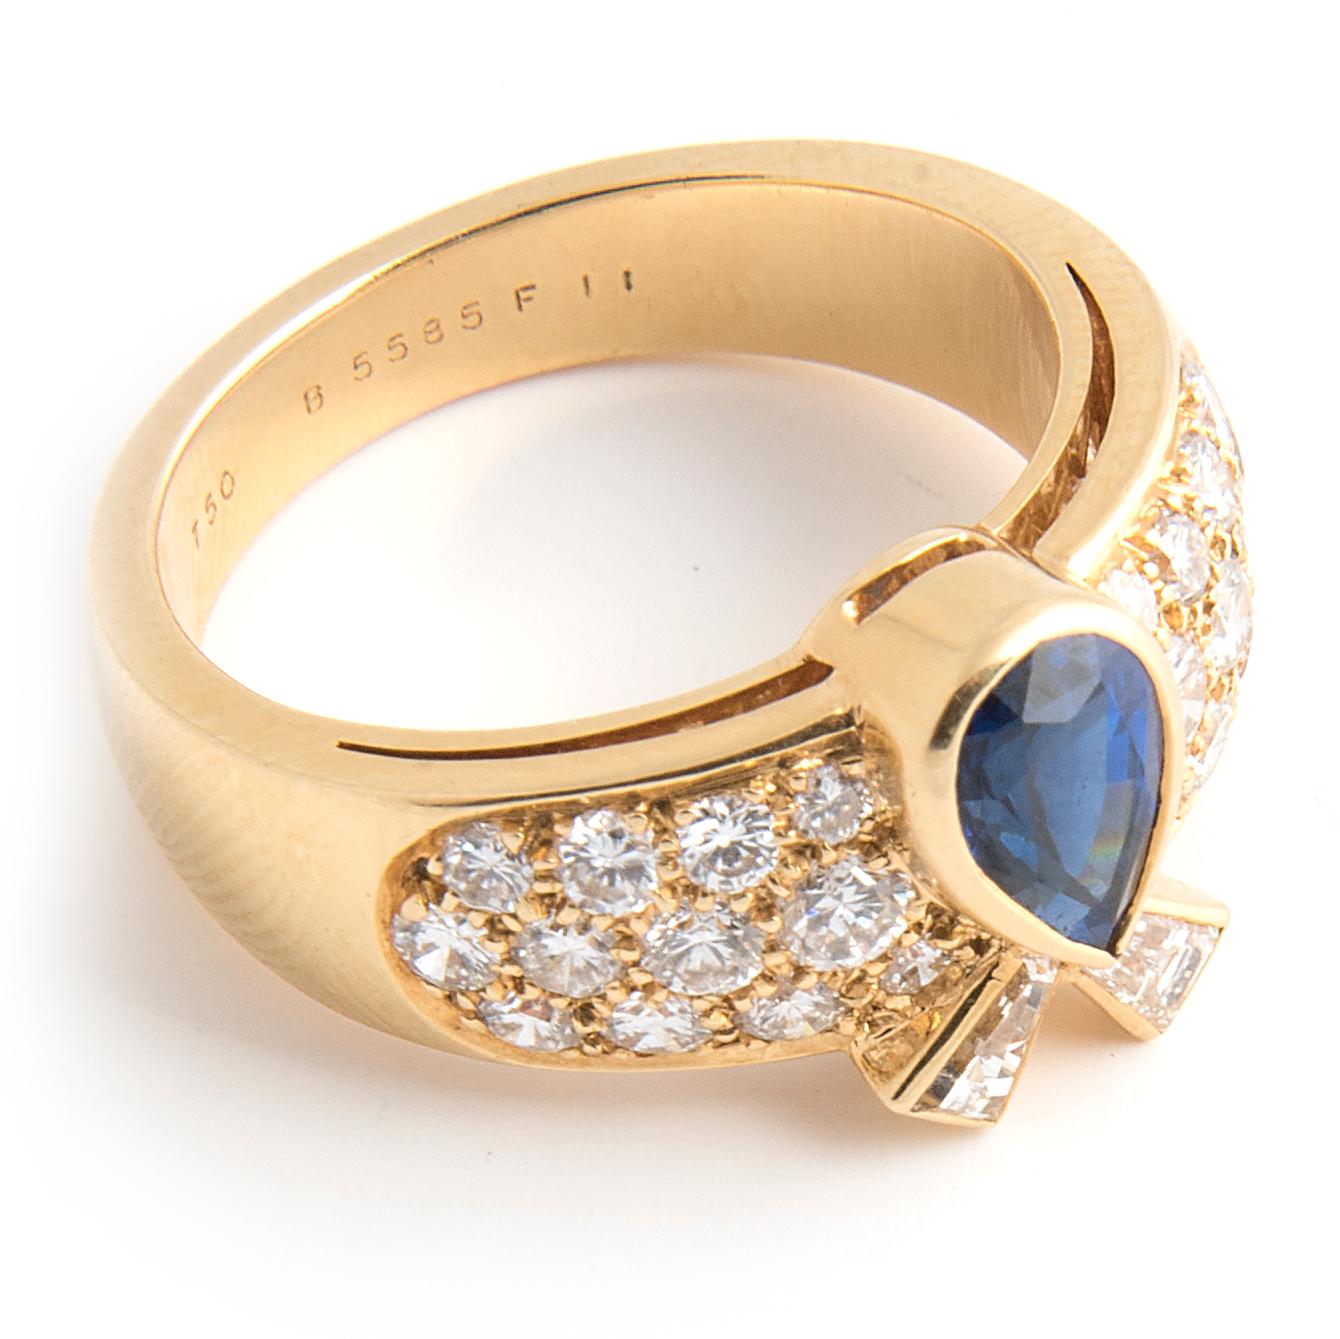 Women's Van Cleef and Arpels 18k Yellow Gold Diamond and Blue Sapphire Ring For Sale